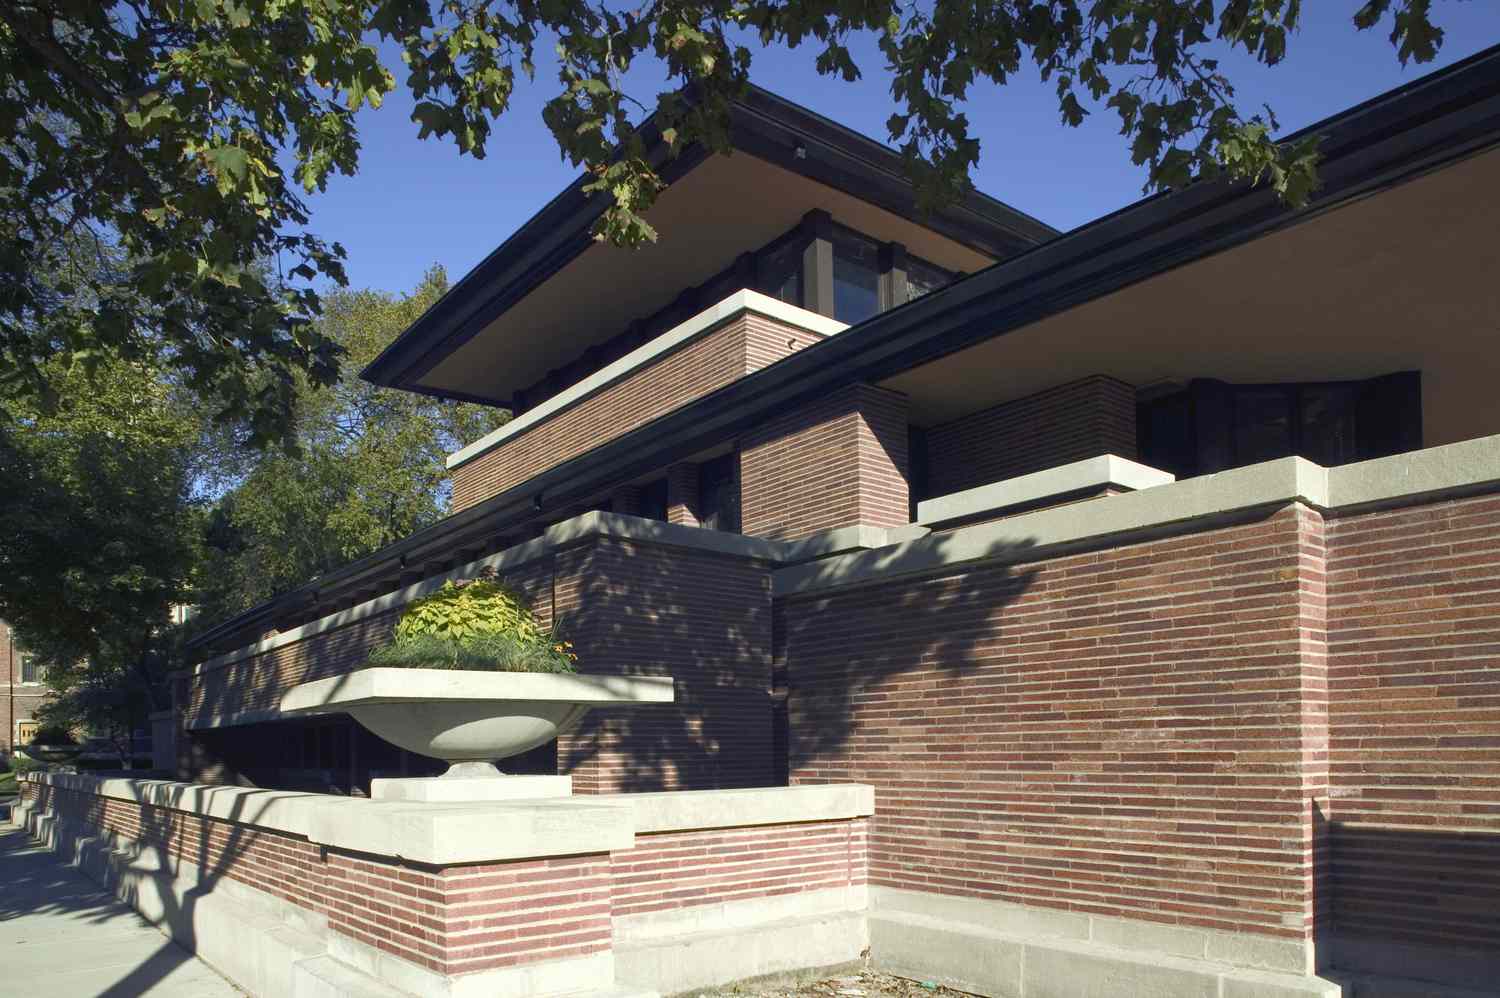 The Robie House in Chicago